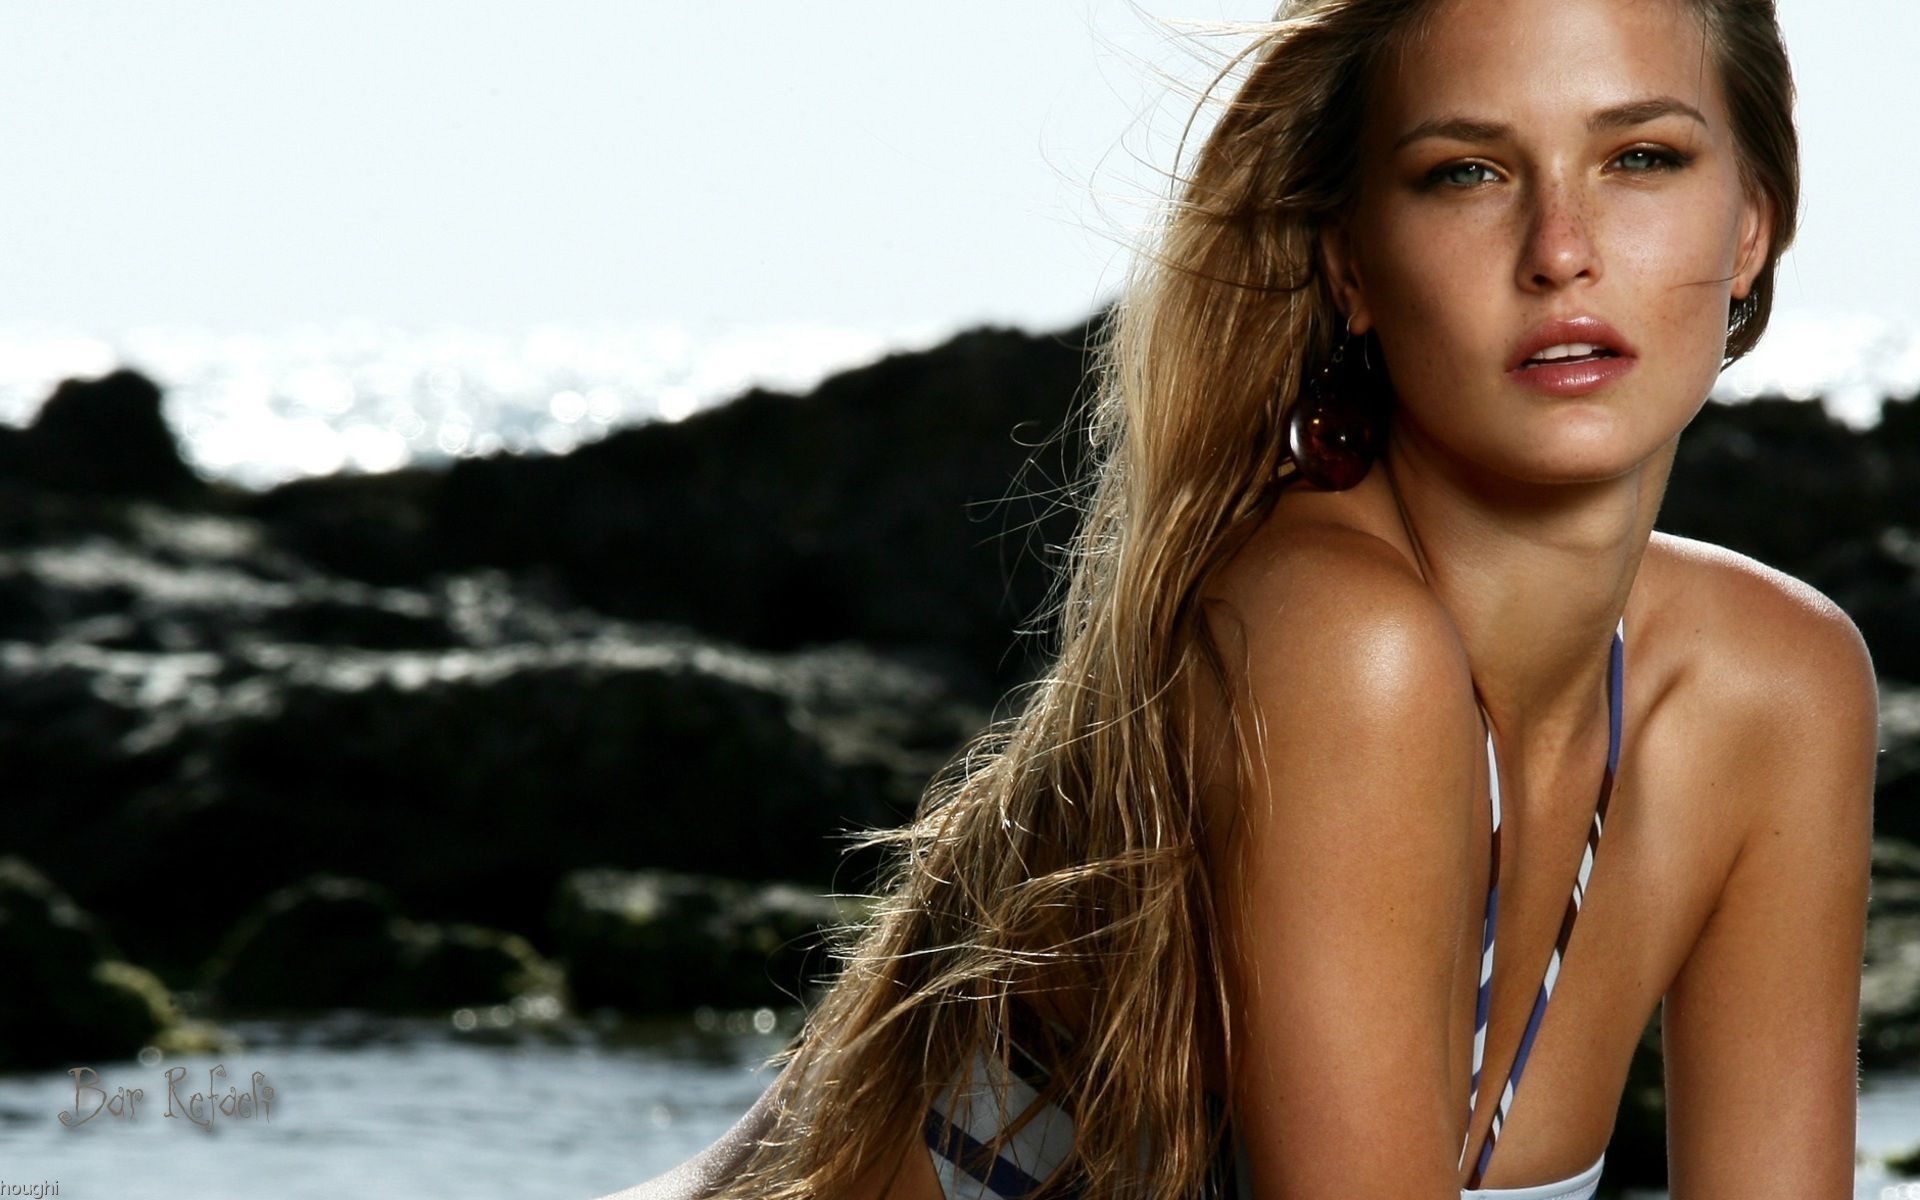 Bar Refaeli #009 - 1920x1200 Wallpapers Pictures Photos Images